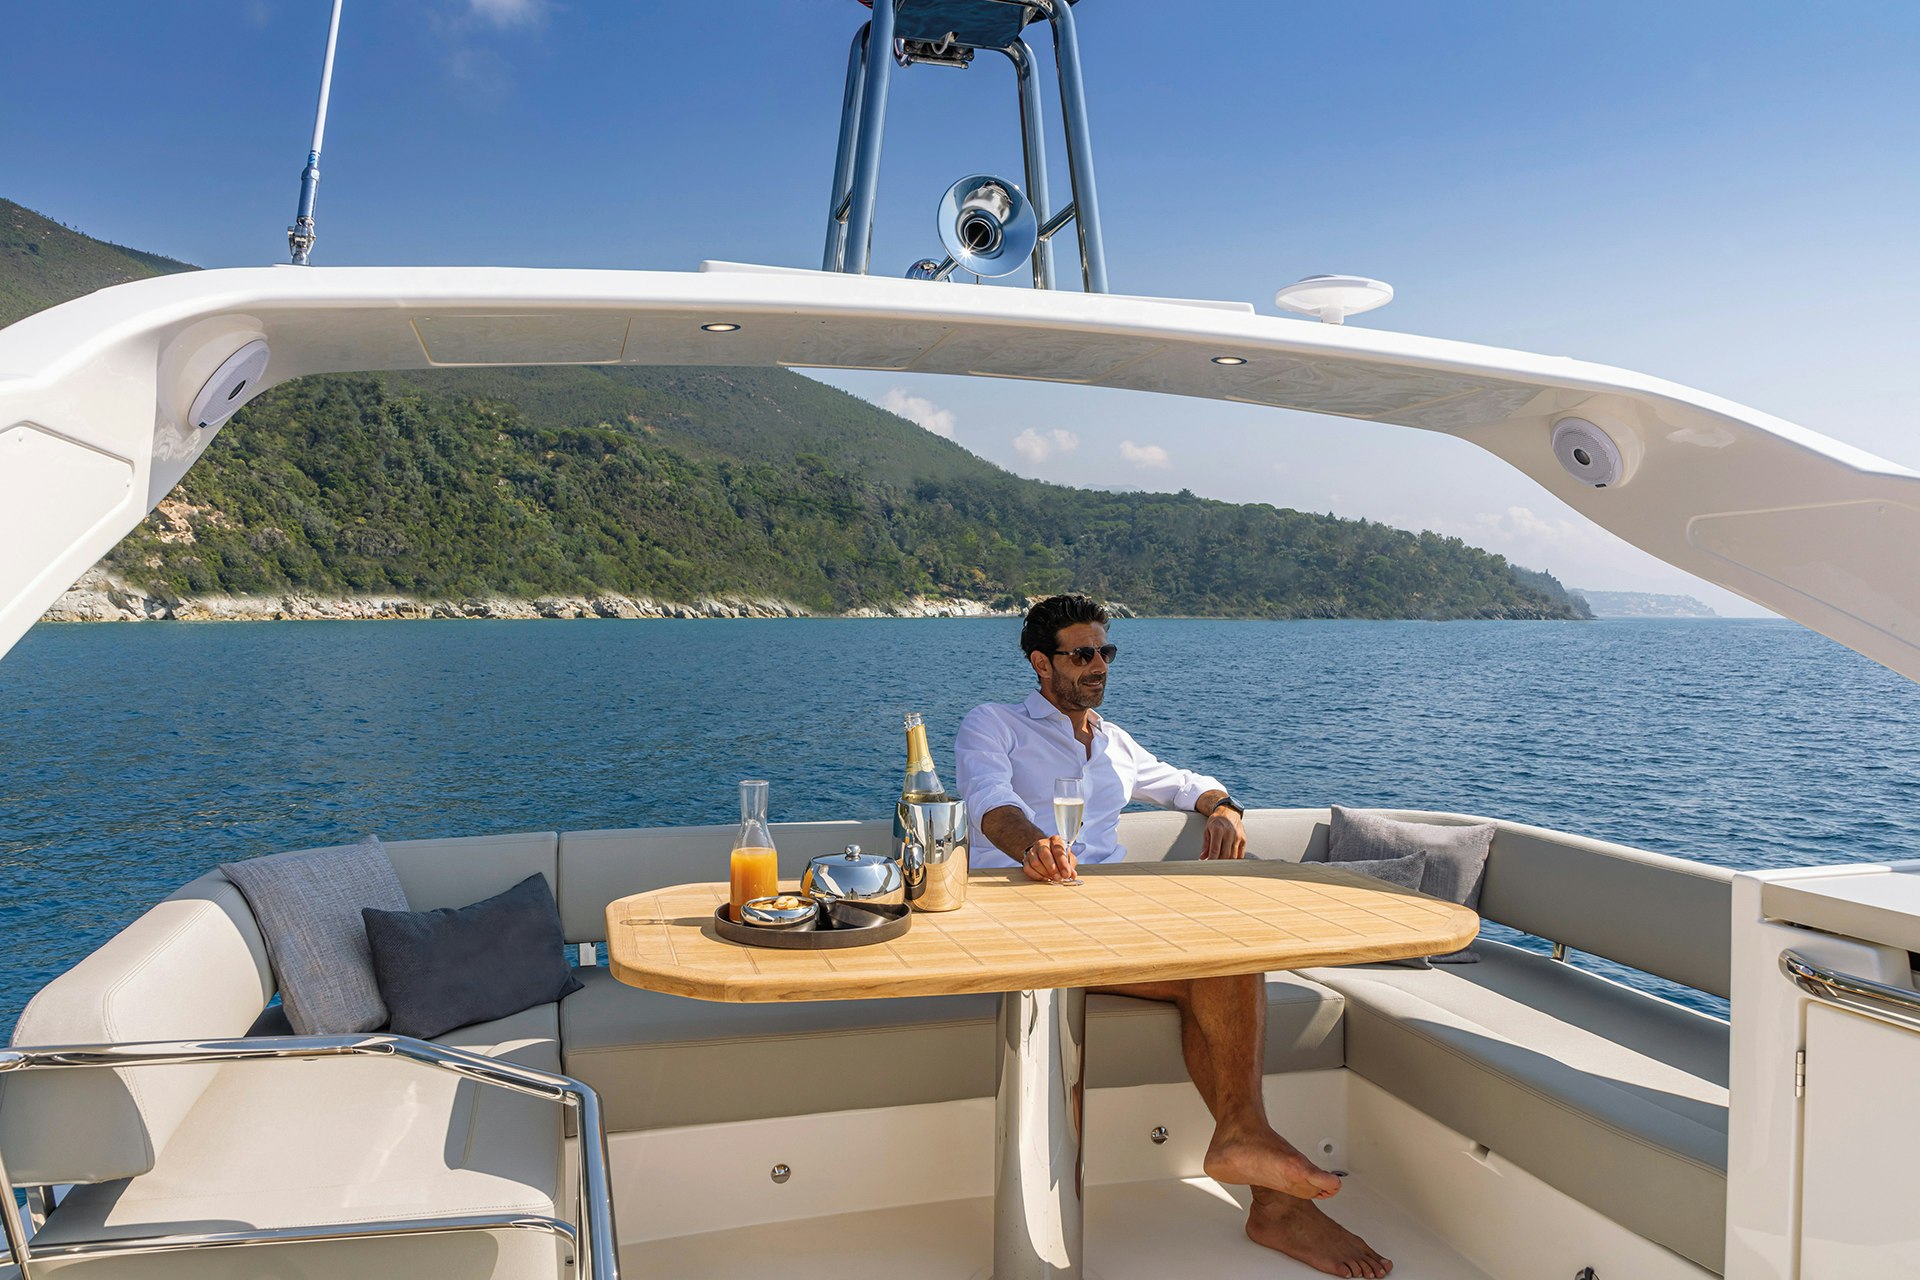 Man sitting at table on yacht.